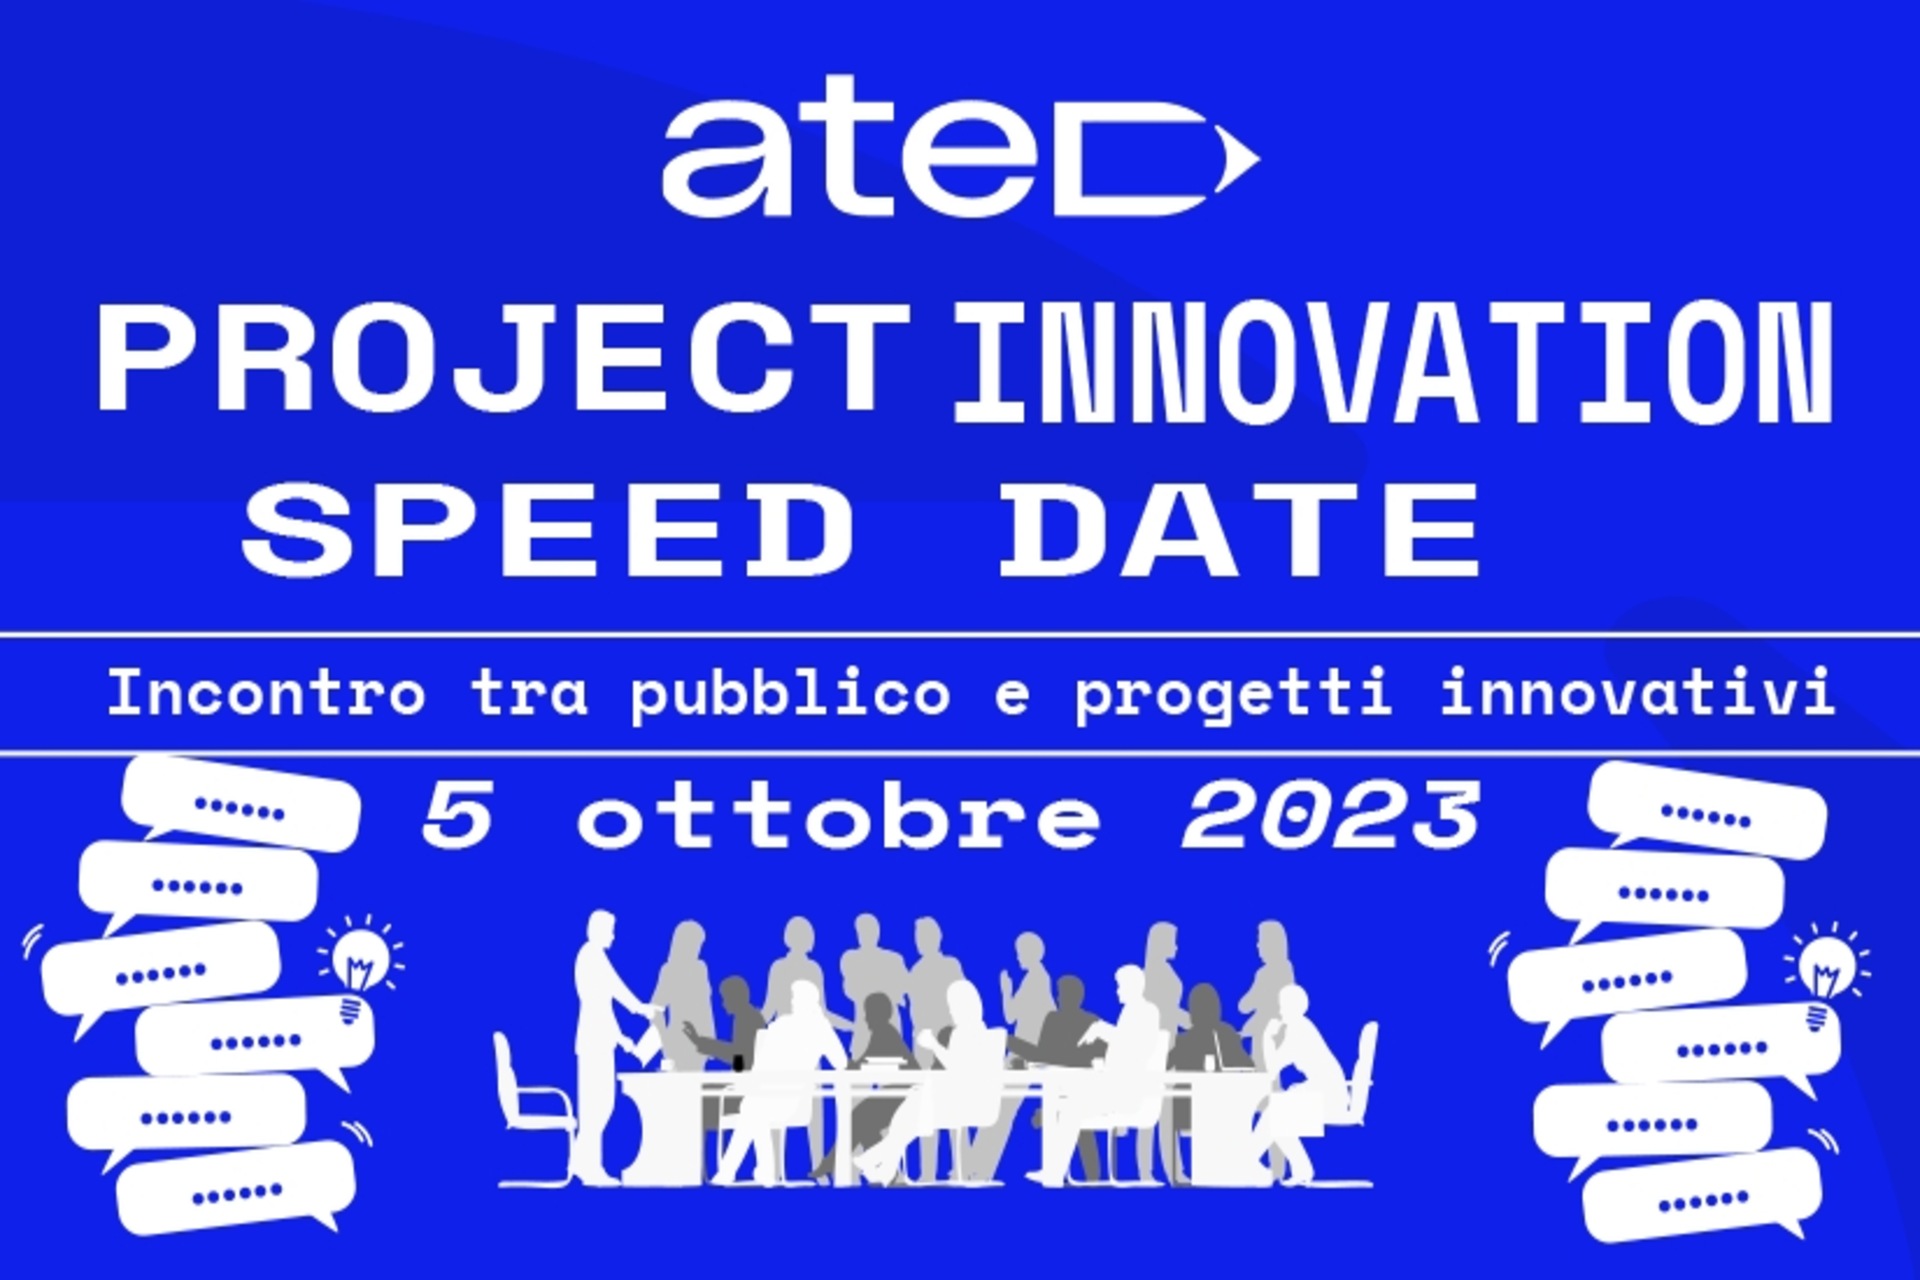 ATED Project Innovation Speed ​​​​Date: poster at key visual